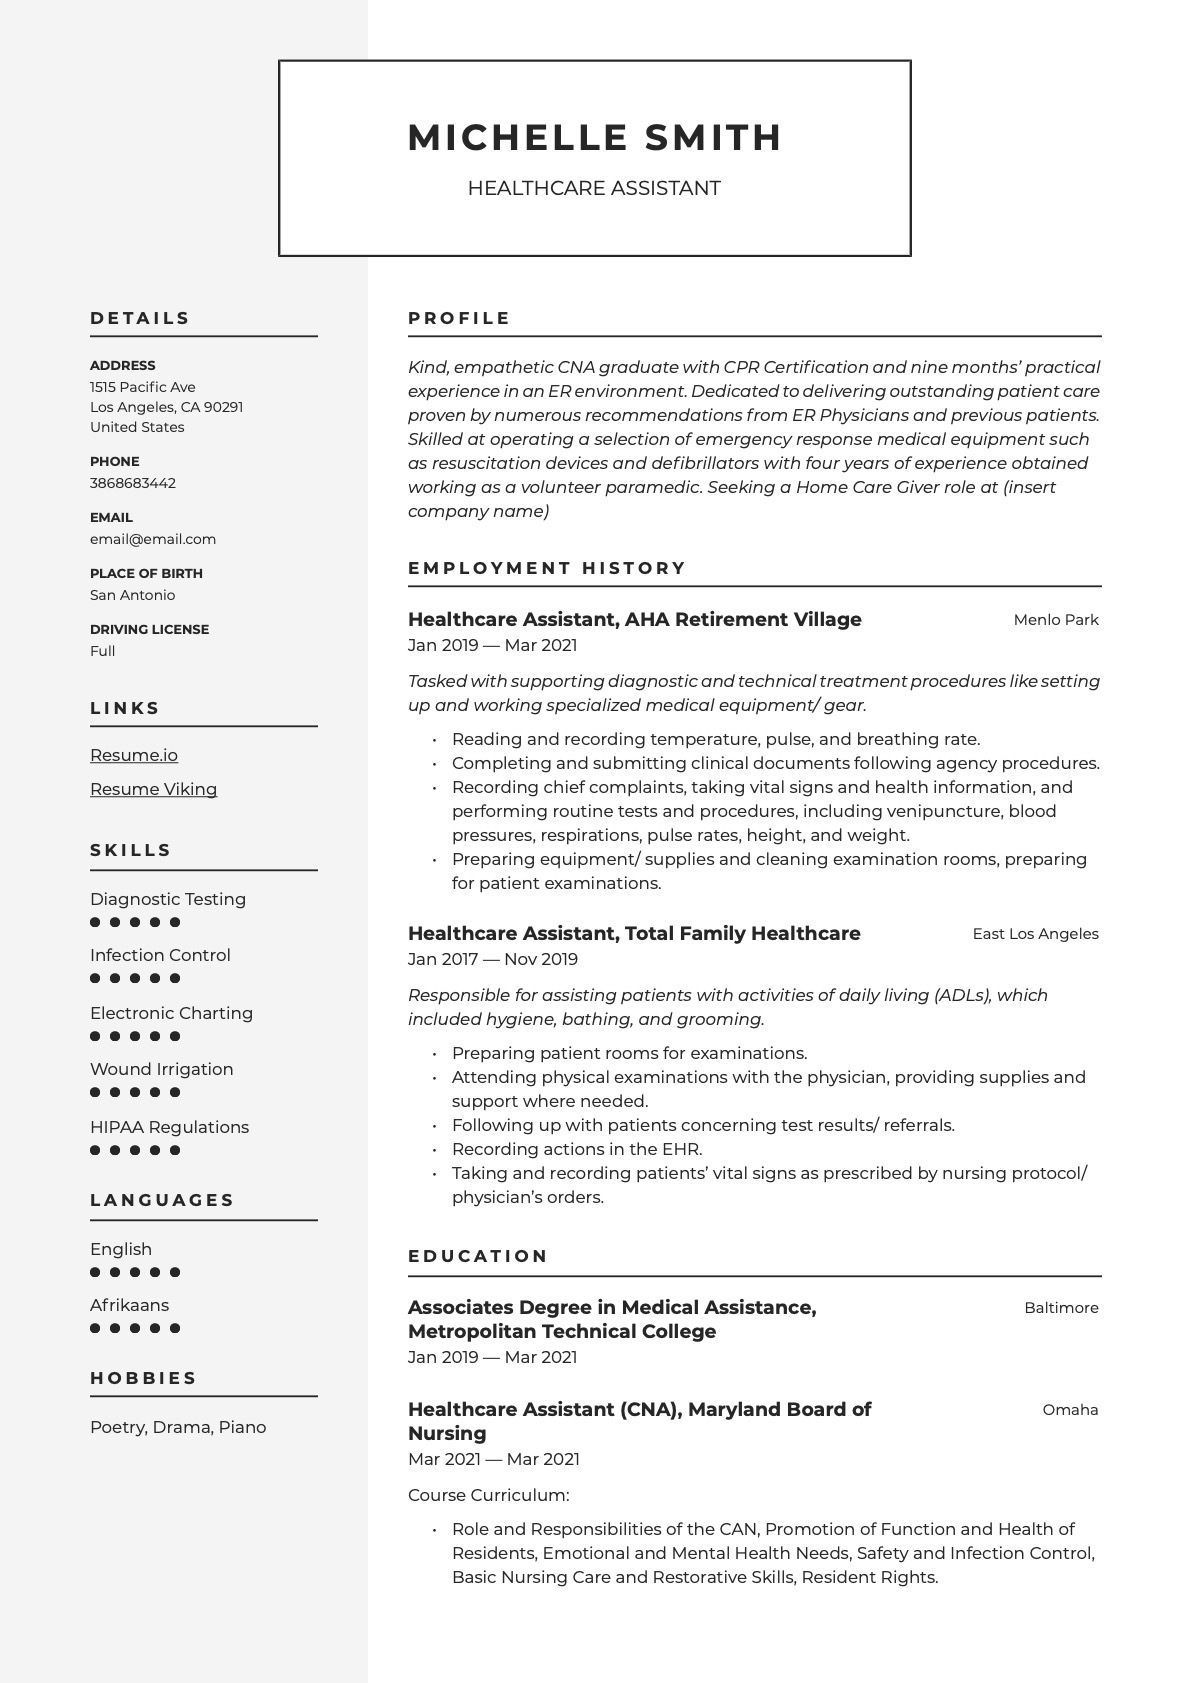 Example Resume Healthcare_Assistant-8